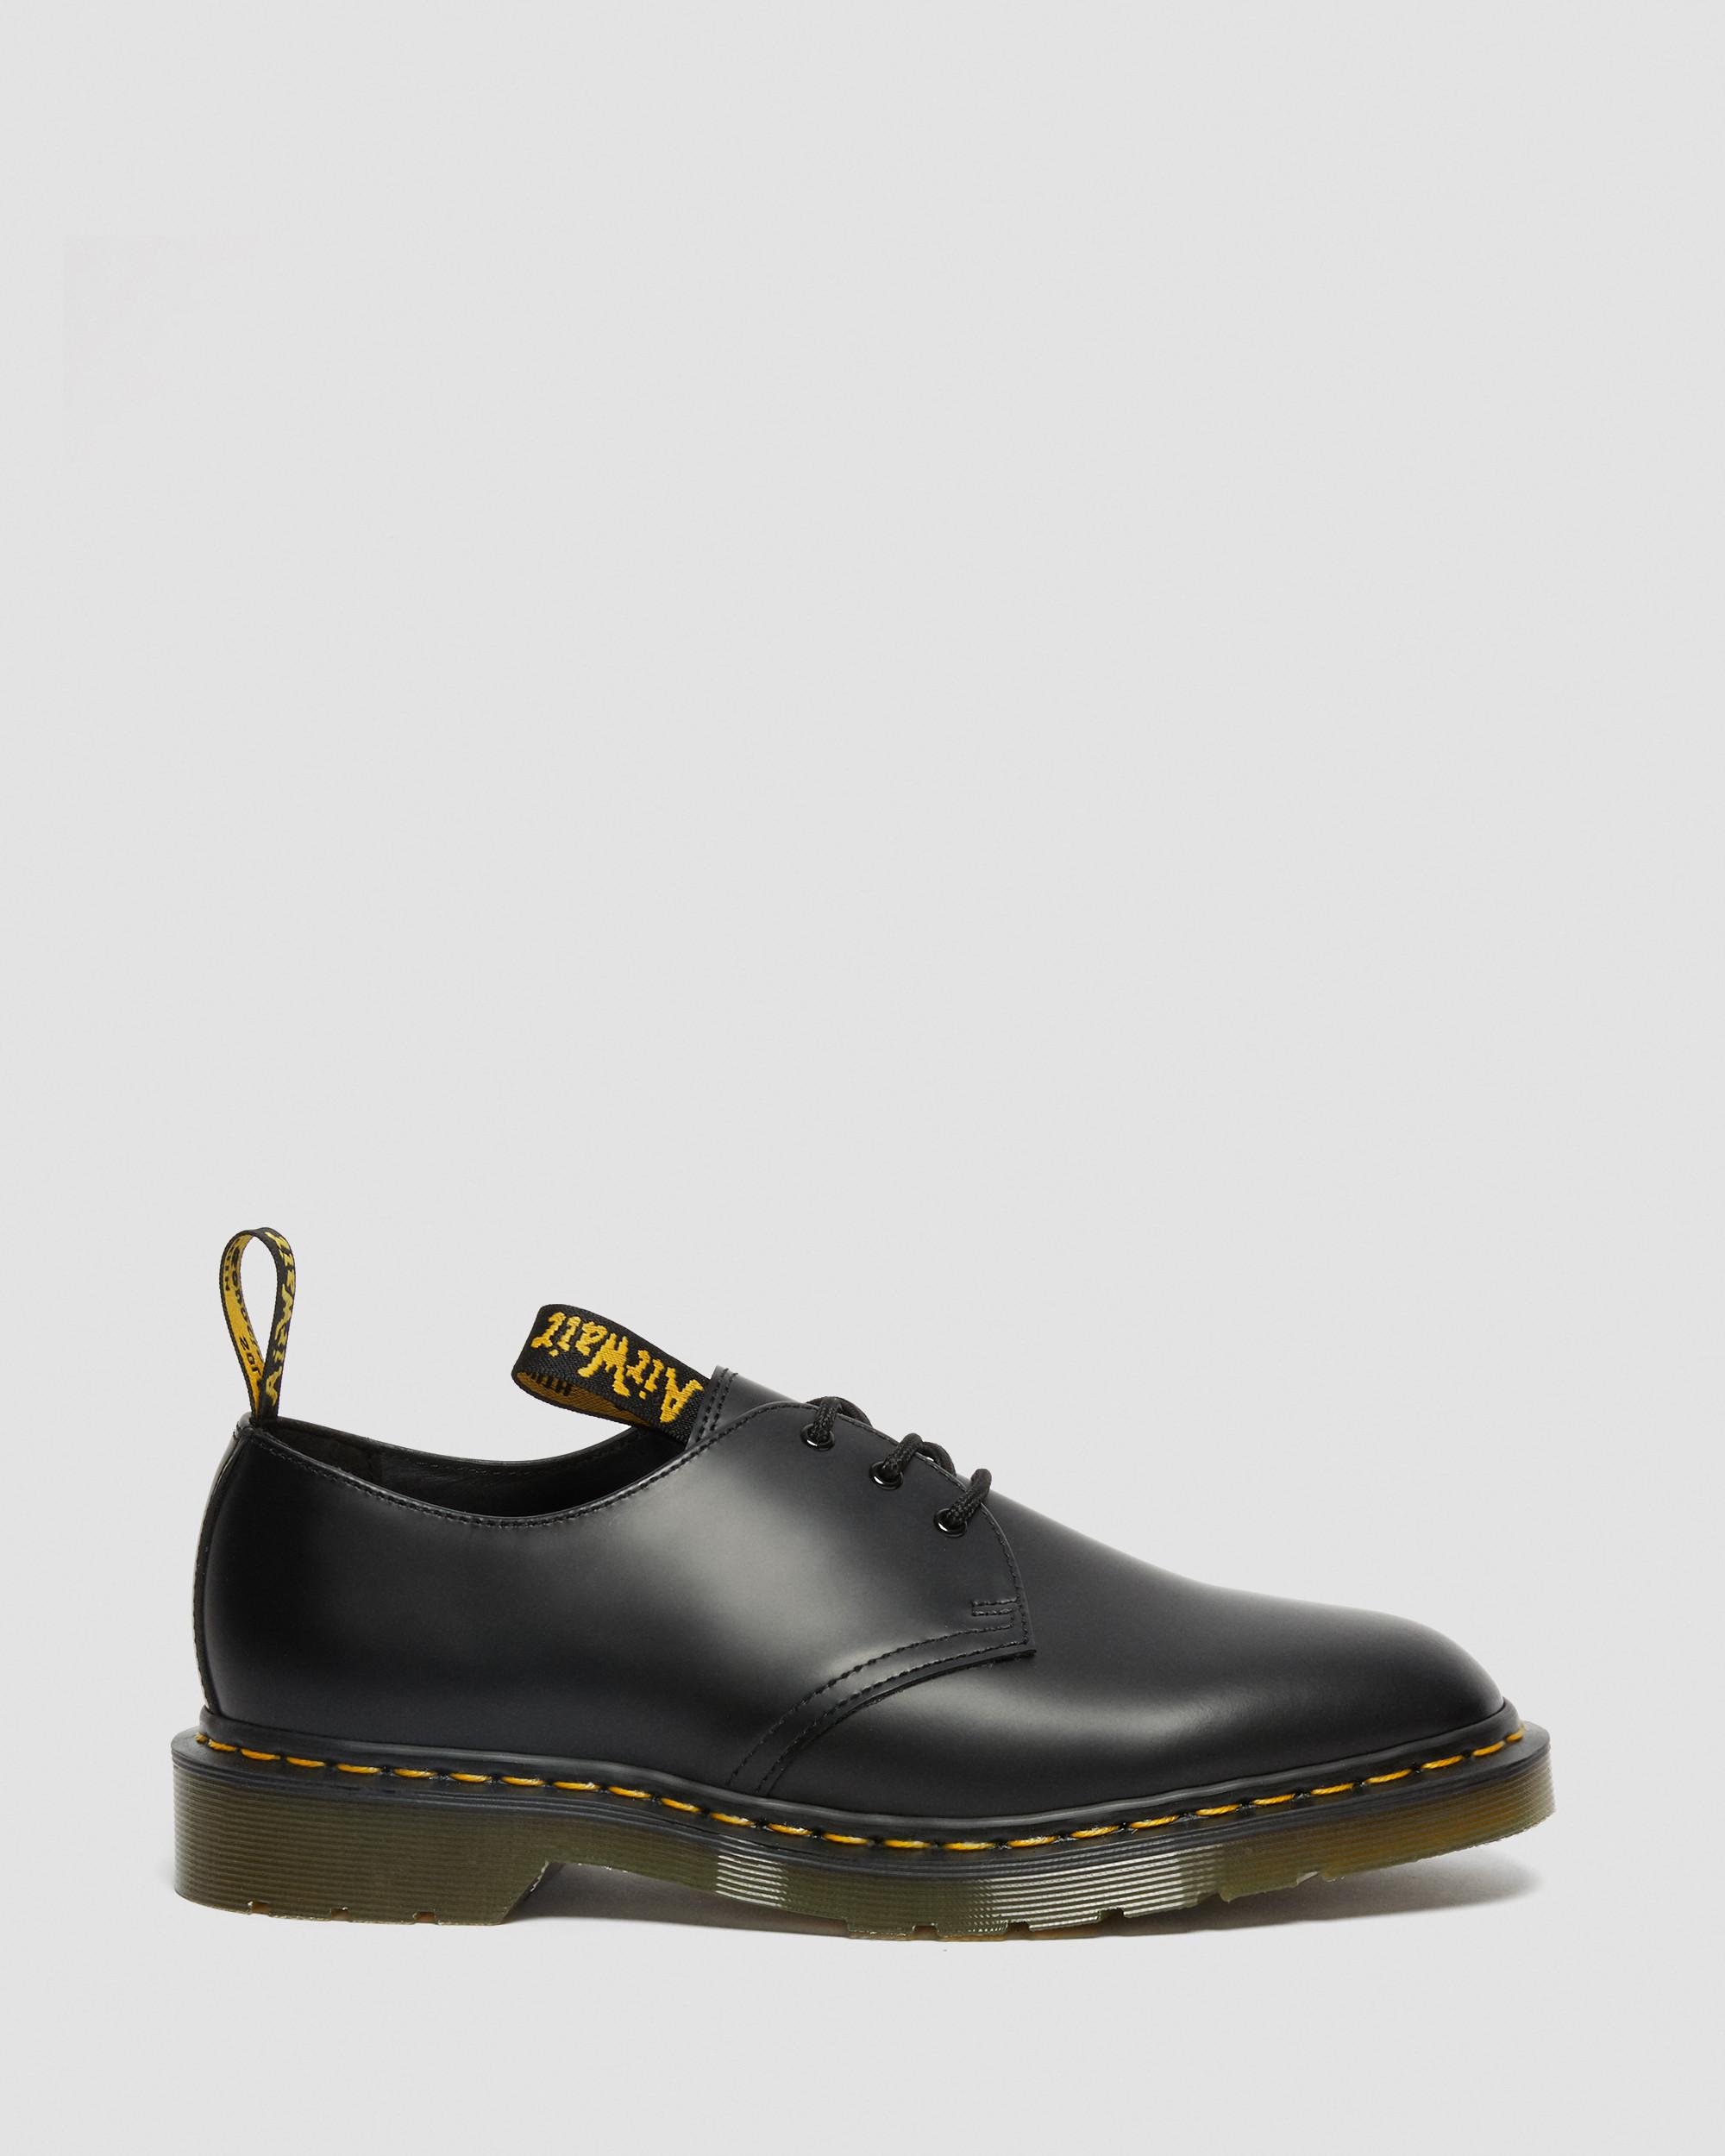 DR MARTENS 1461 Engineered Garments Leather Oxford Shoes